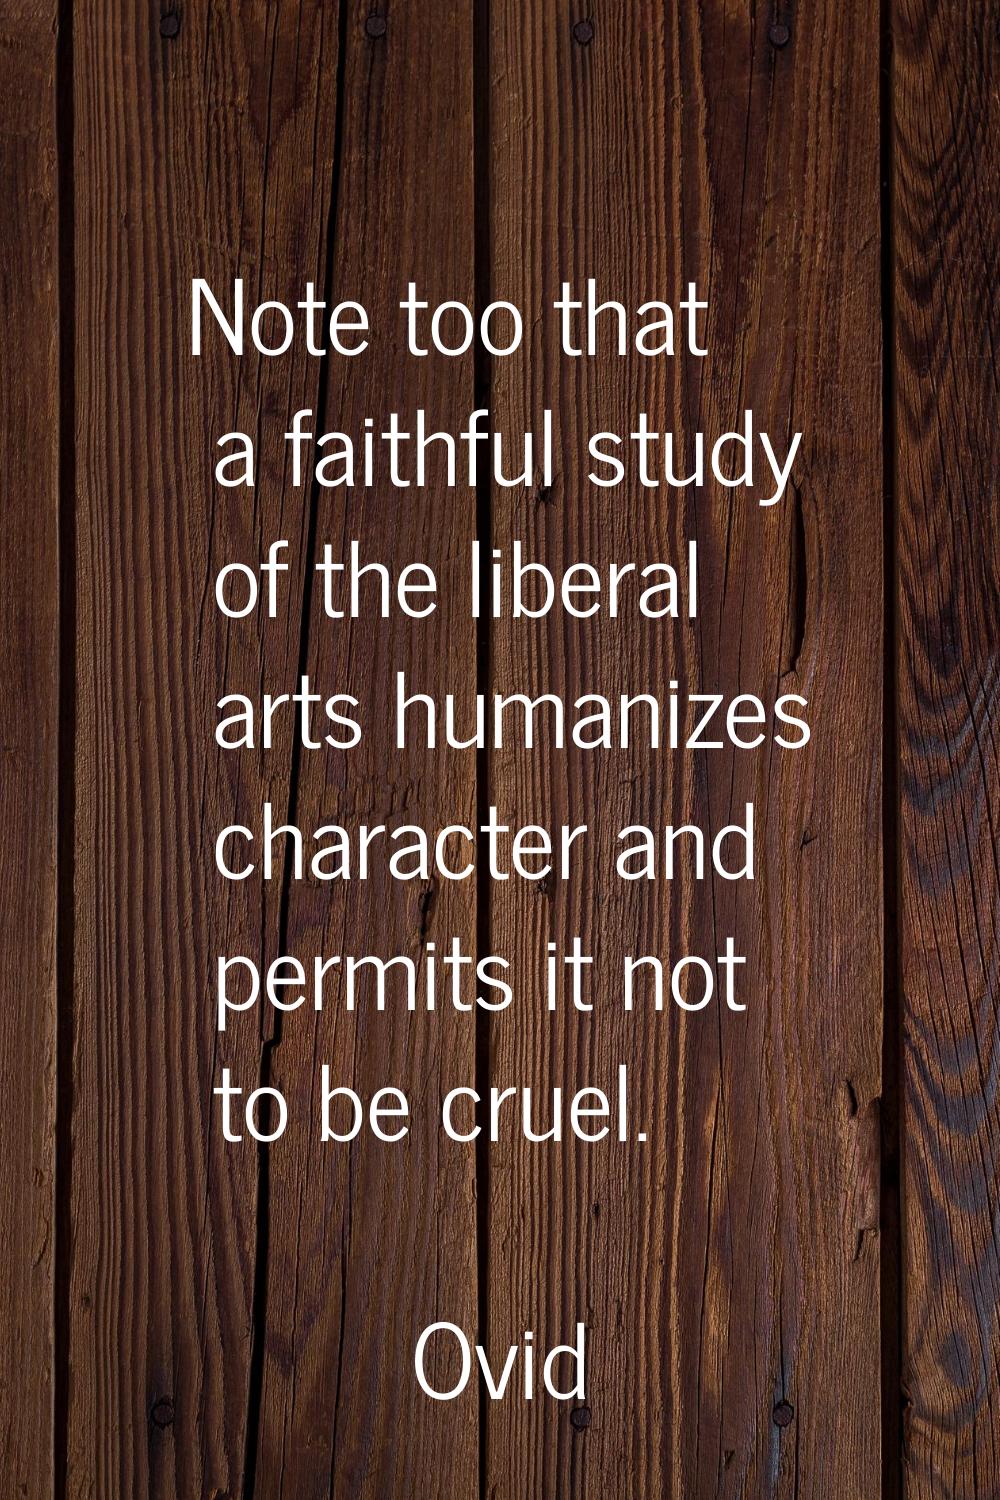 Note too that a faithful study of the liberal arts humanizes character and permits it not to be cru